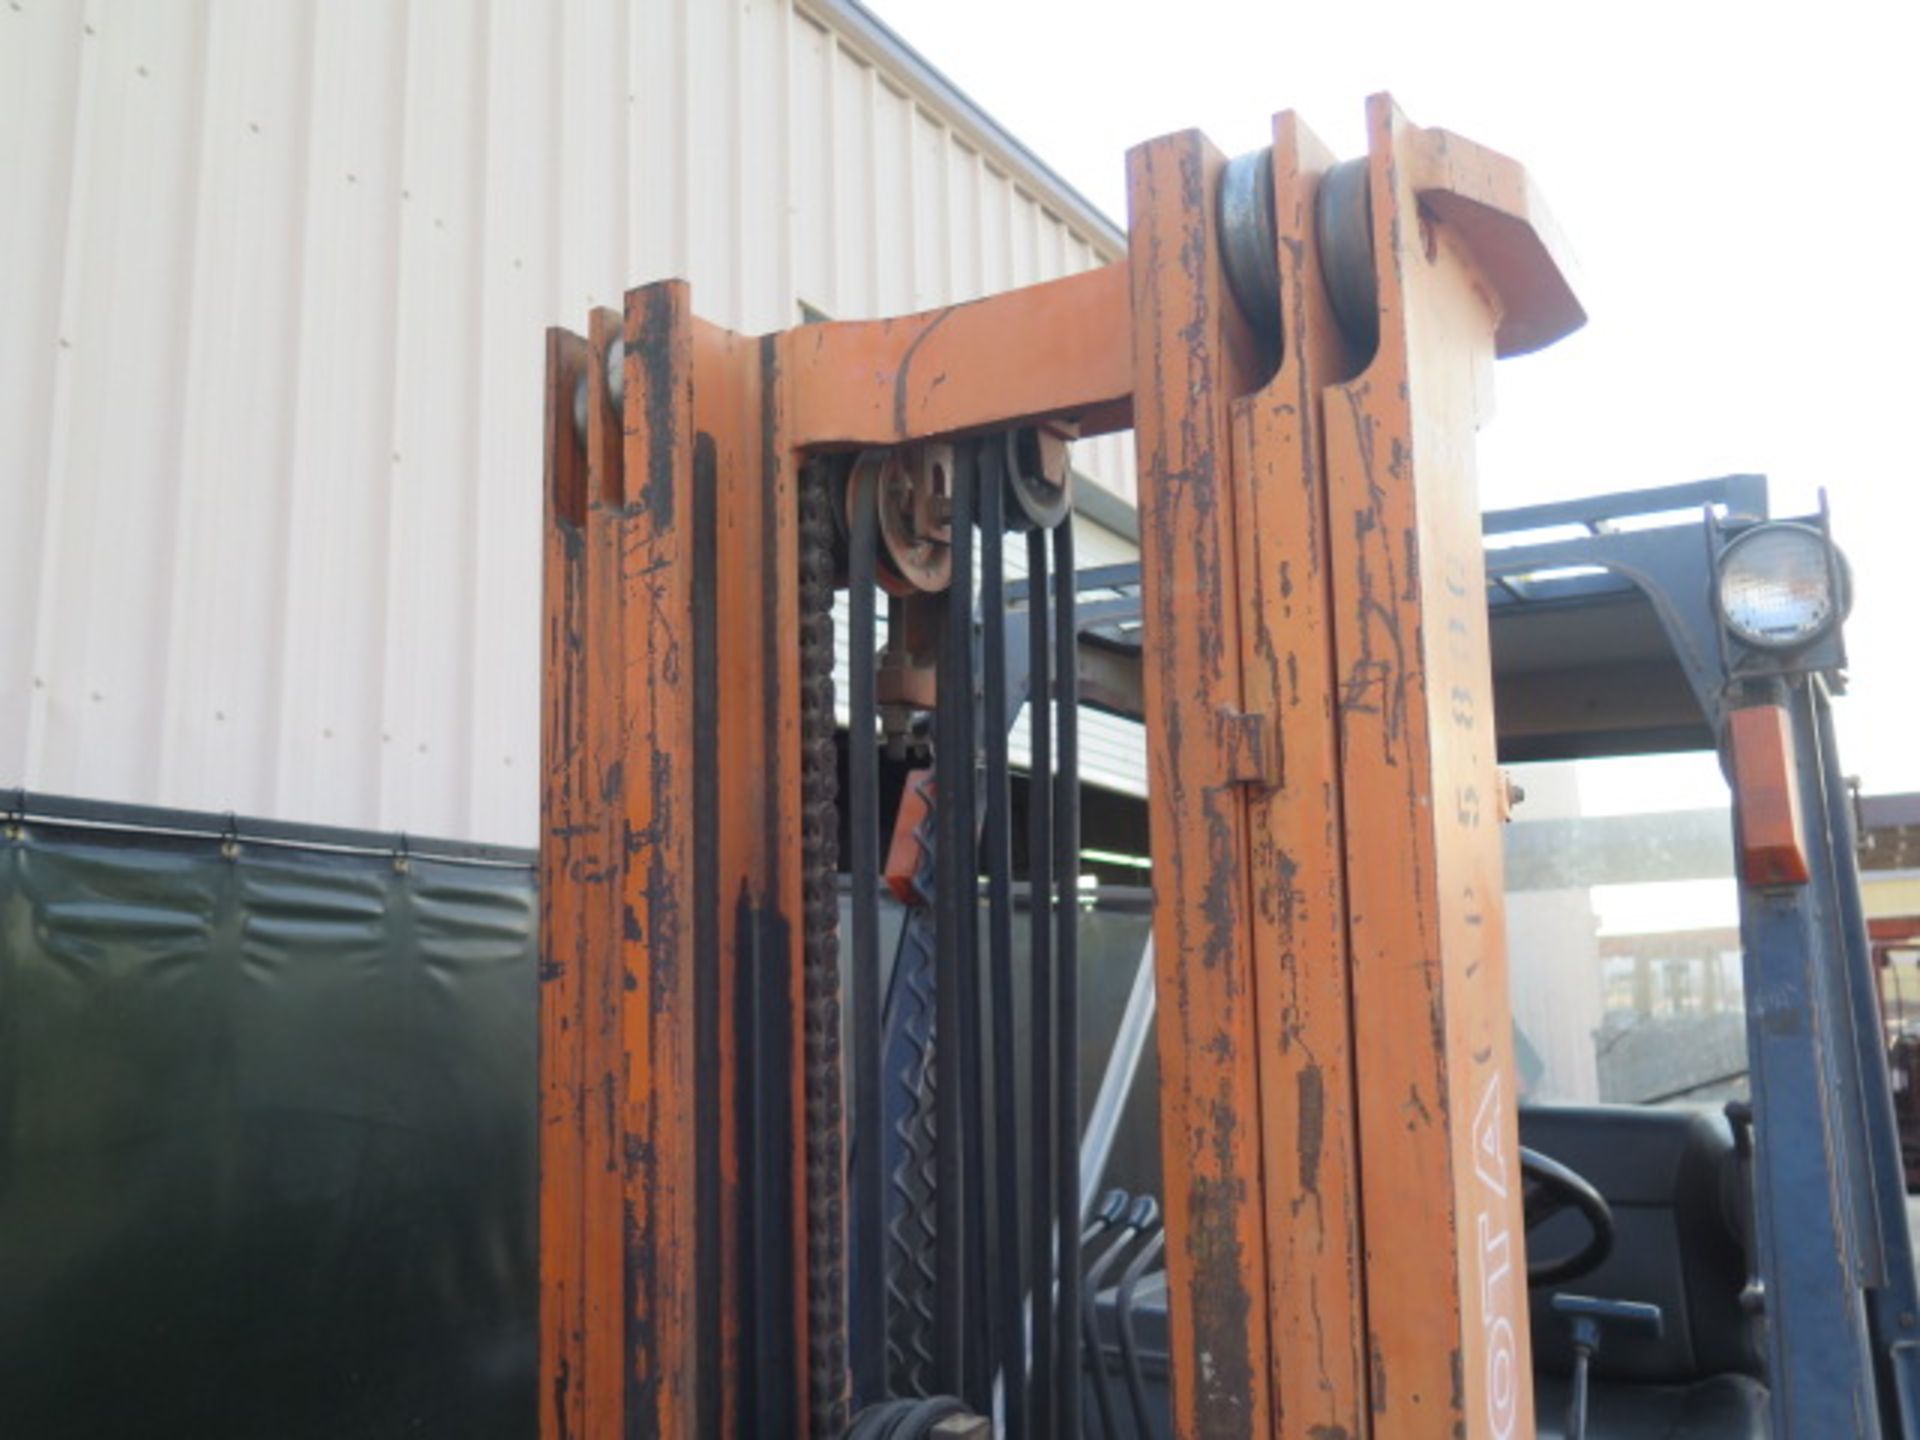 Toyota 02-5FGC30 5800 Lb Cap LPG Forklift s/n 5FGC30-11577 w/ 3-Stage Mast, Side Shift, SOLD AS IS - Image 5 of 11